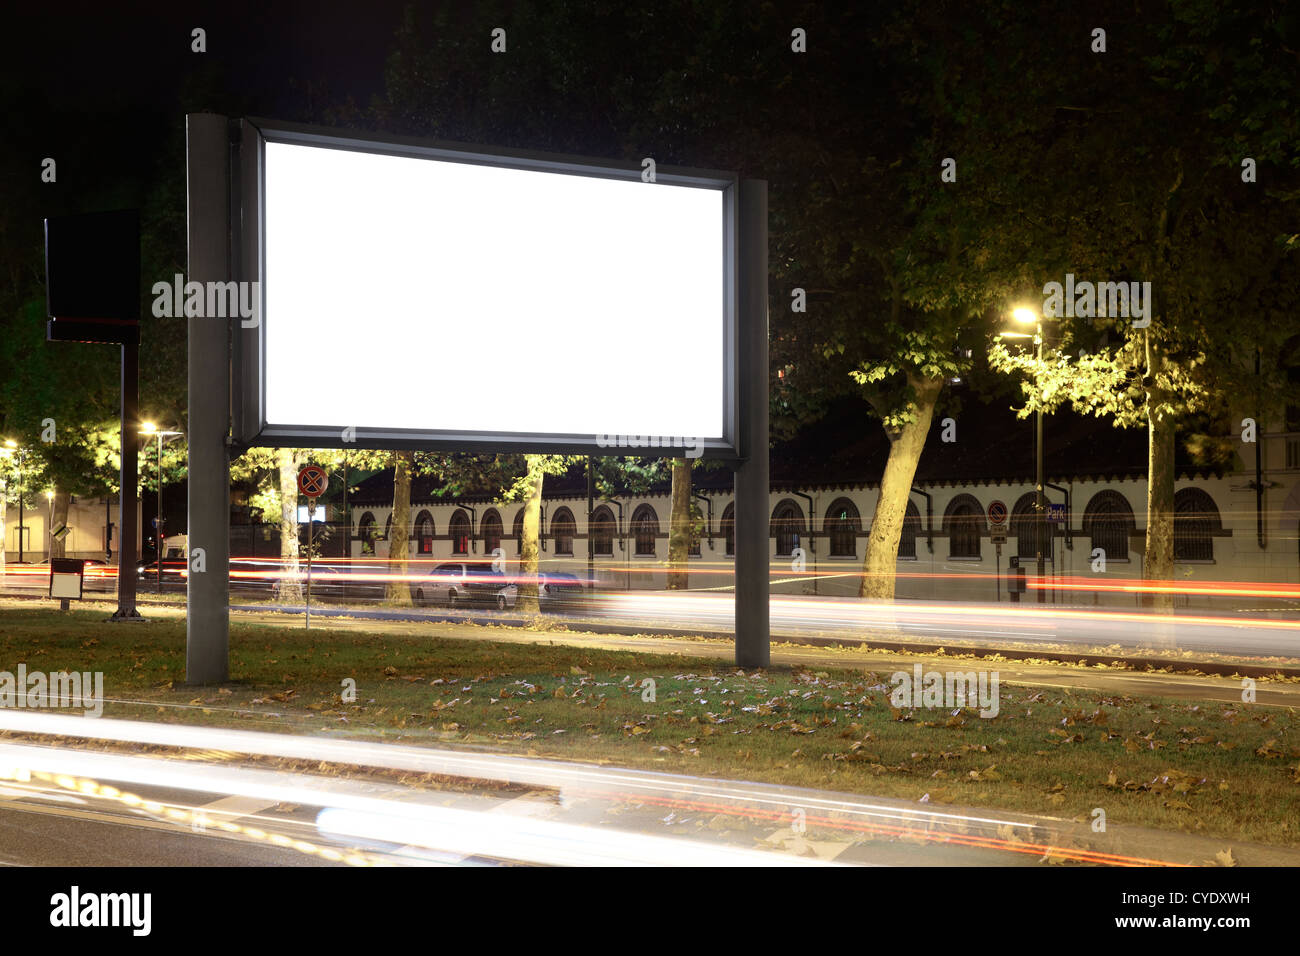 Blank billboard in the city at night Stock Photo